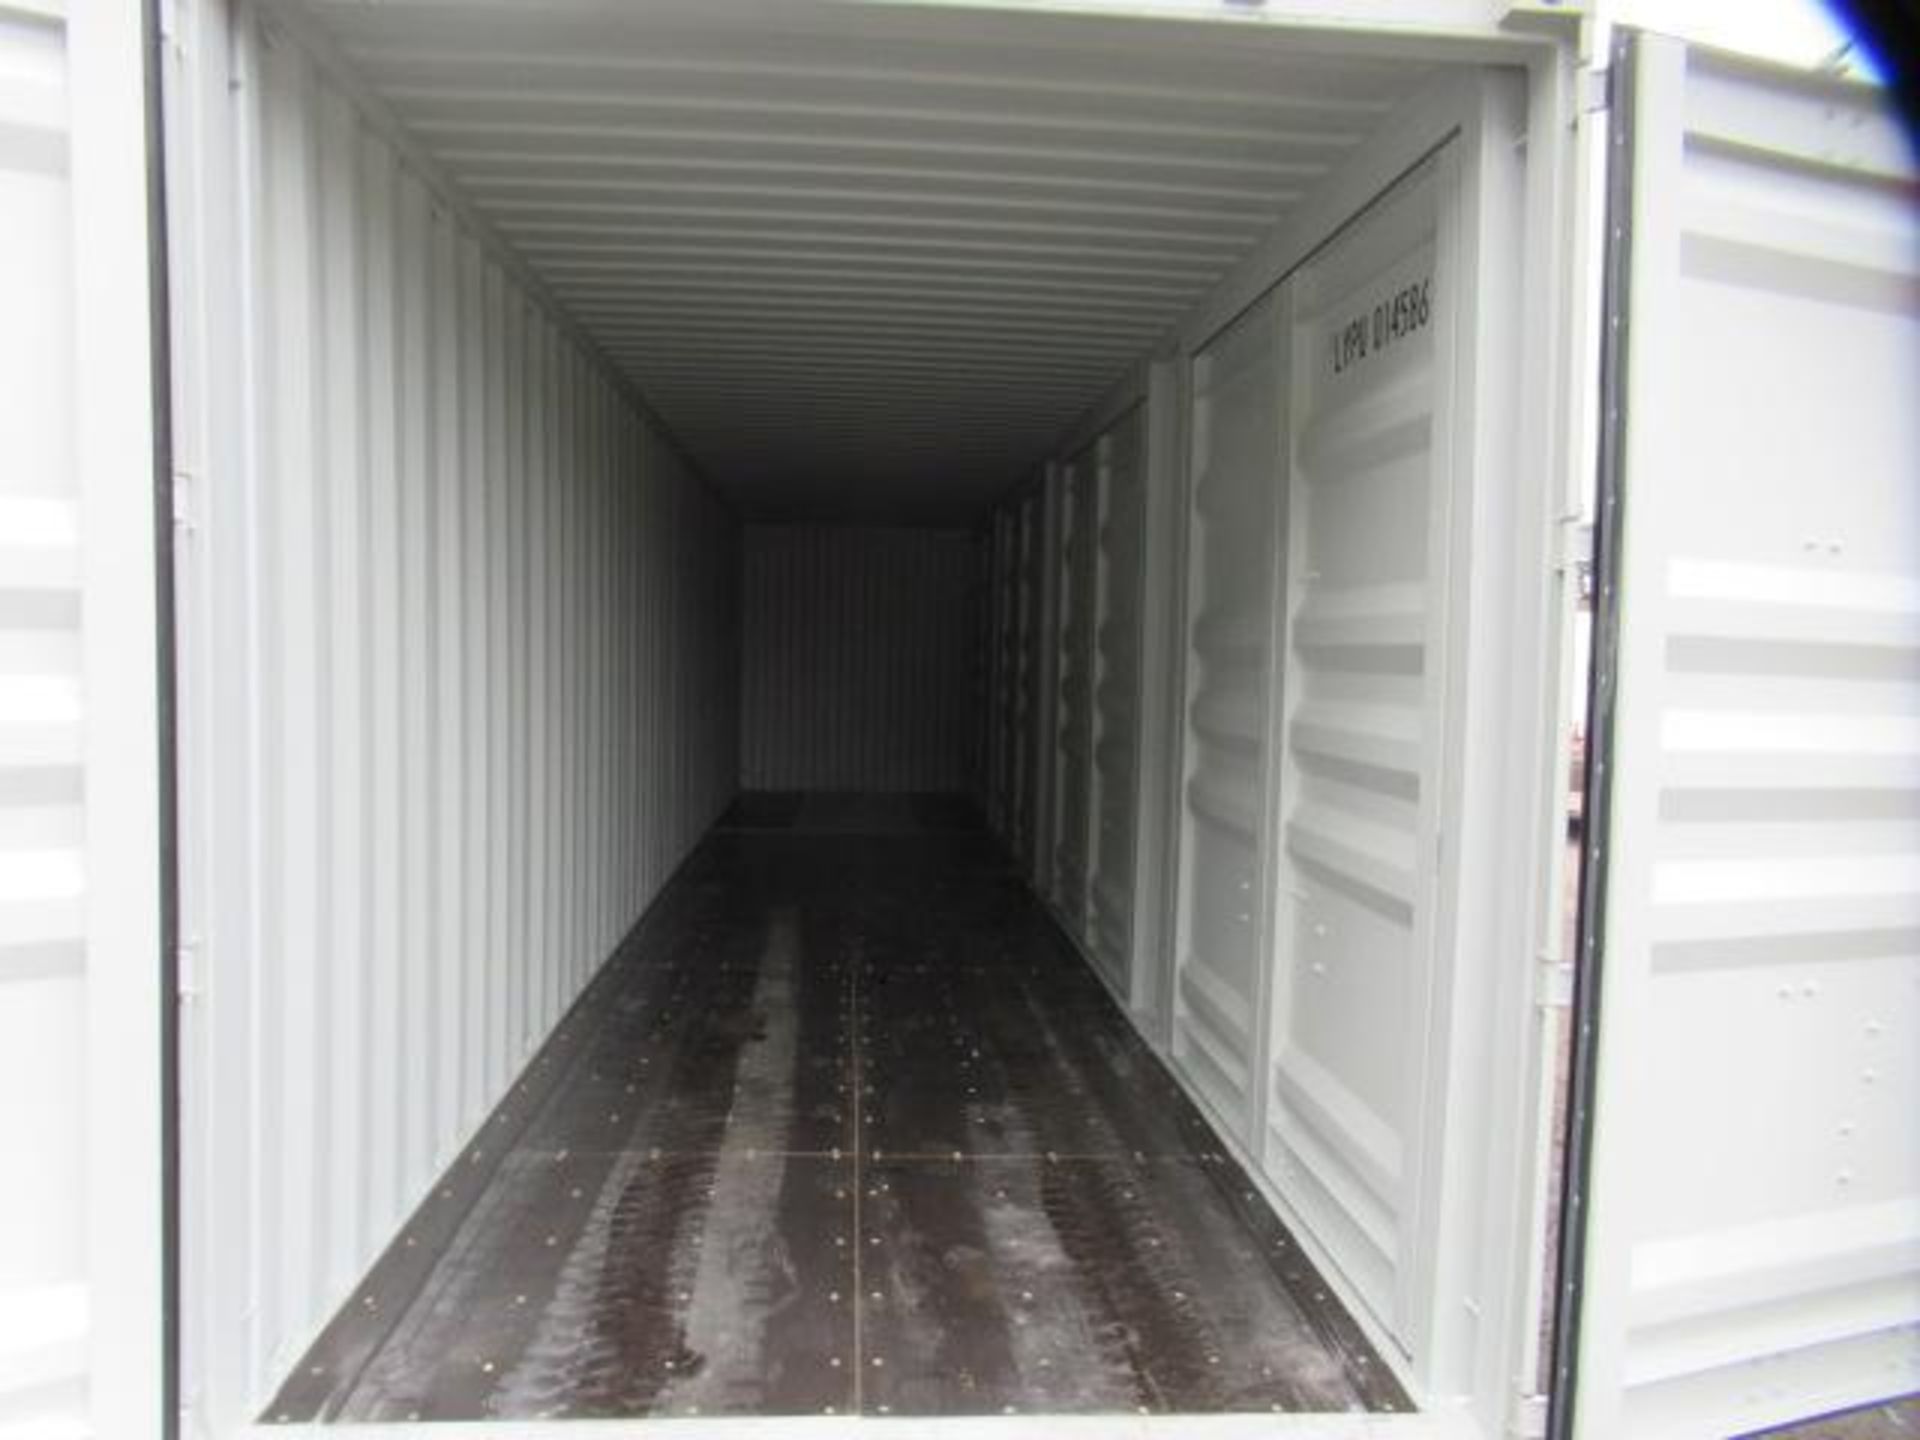 2024 40' HIGH CUBE SHIPPING CONTAINER W/ (4) SIDE DOORS, SER#: LYPU0145868 (UNUSED) - Image 5 of 6